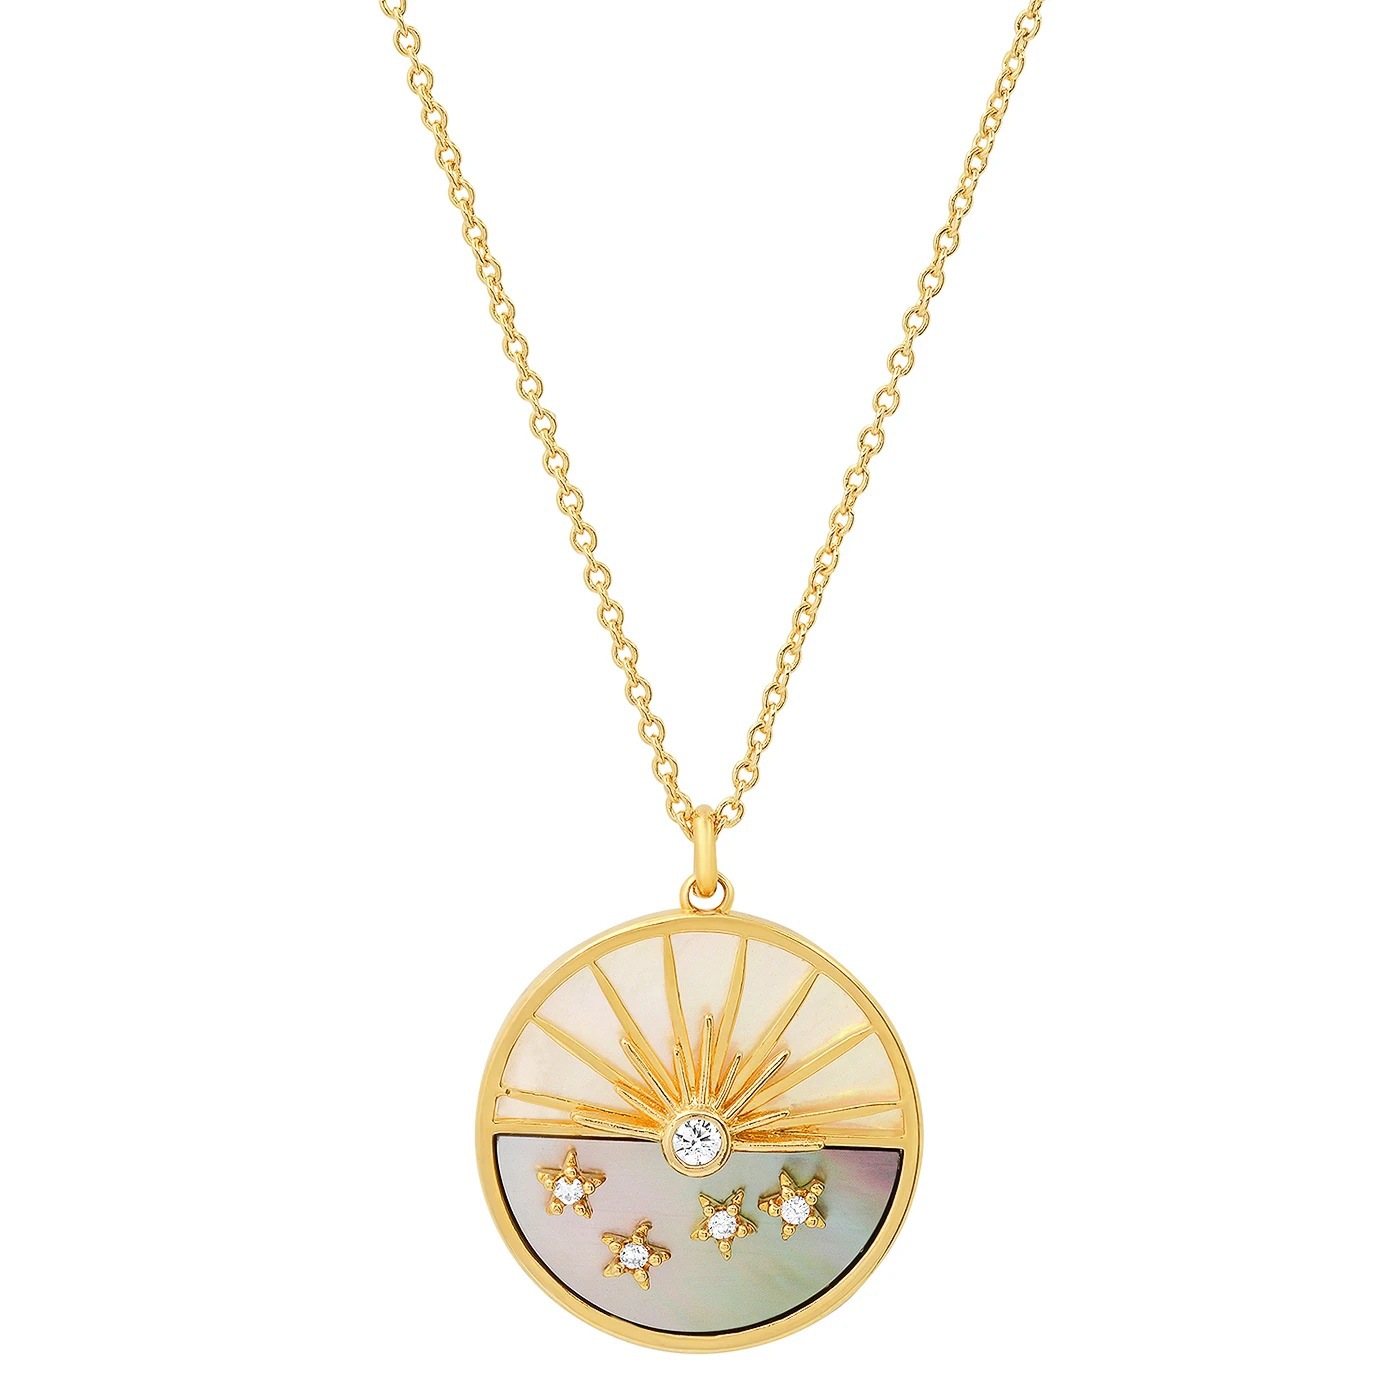 Round Necklace of sun rays